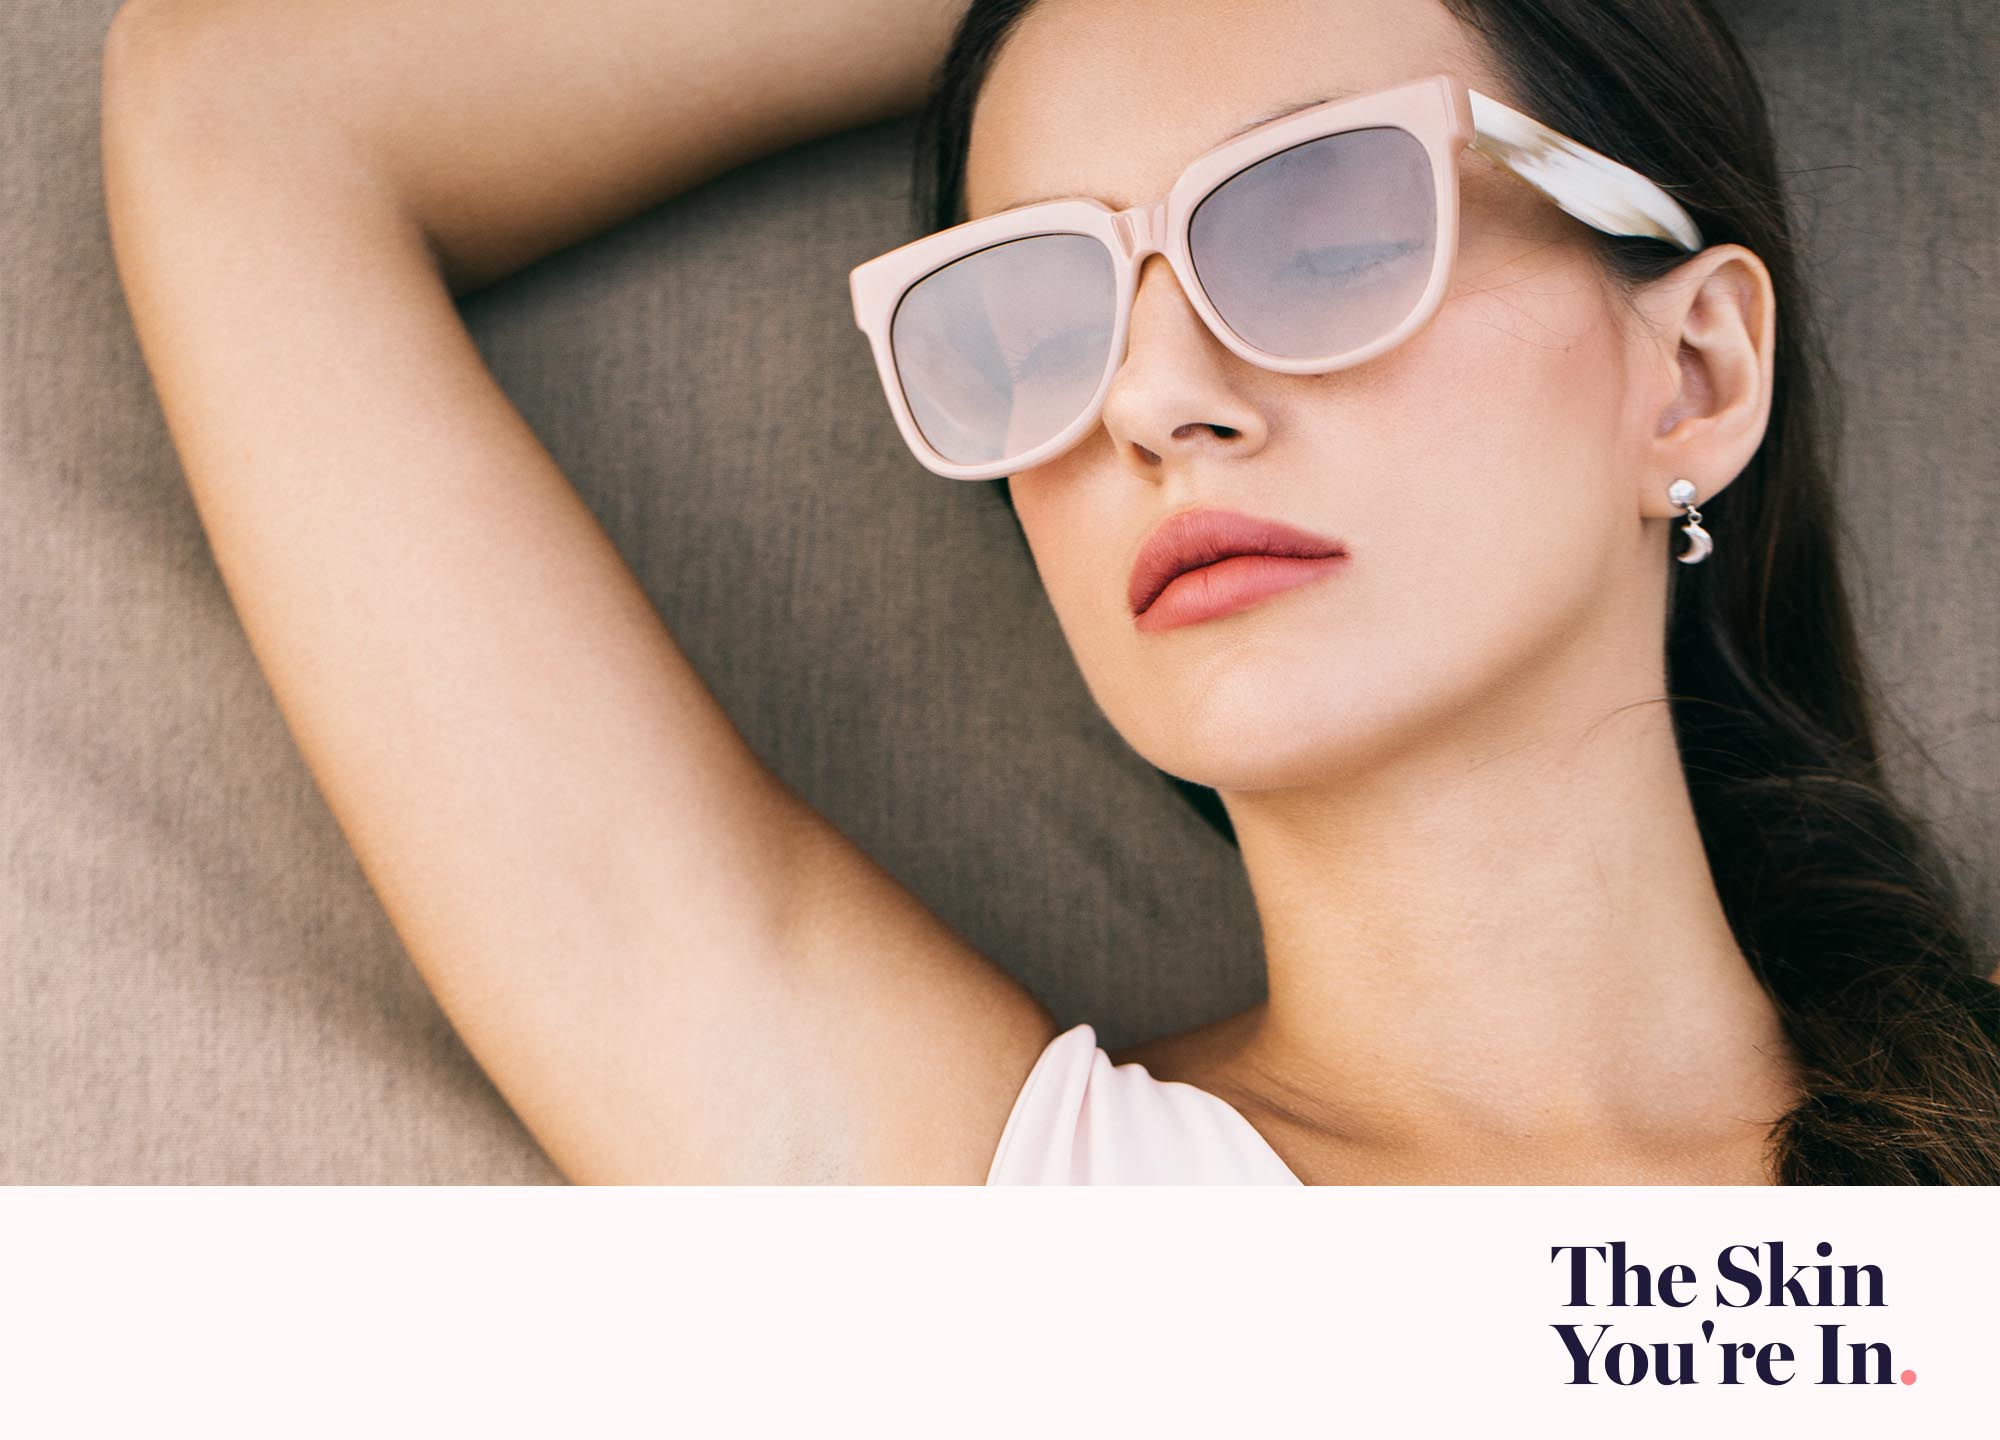 Wondering how to prevent and treat photoaging? Learn about how photoaging happens, why sunscreen is so important and at-home treatments that can reverse photodamaged skin.